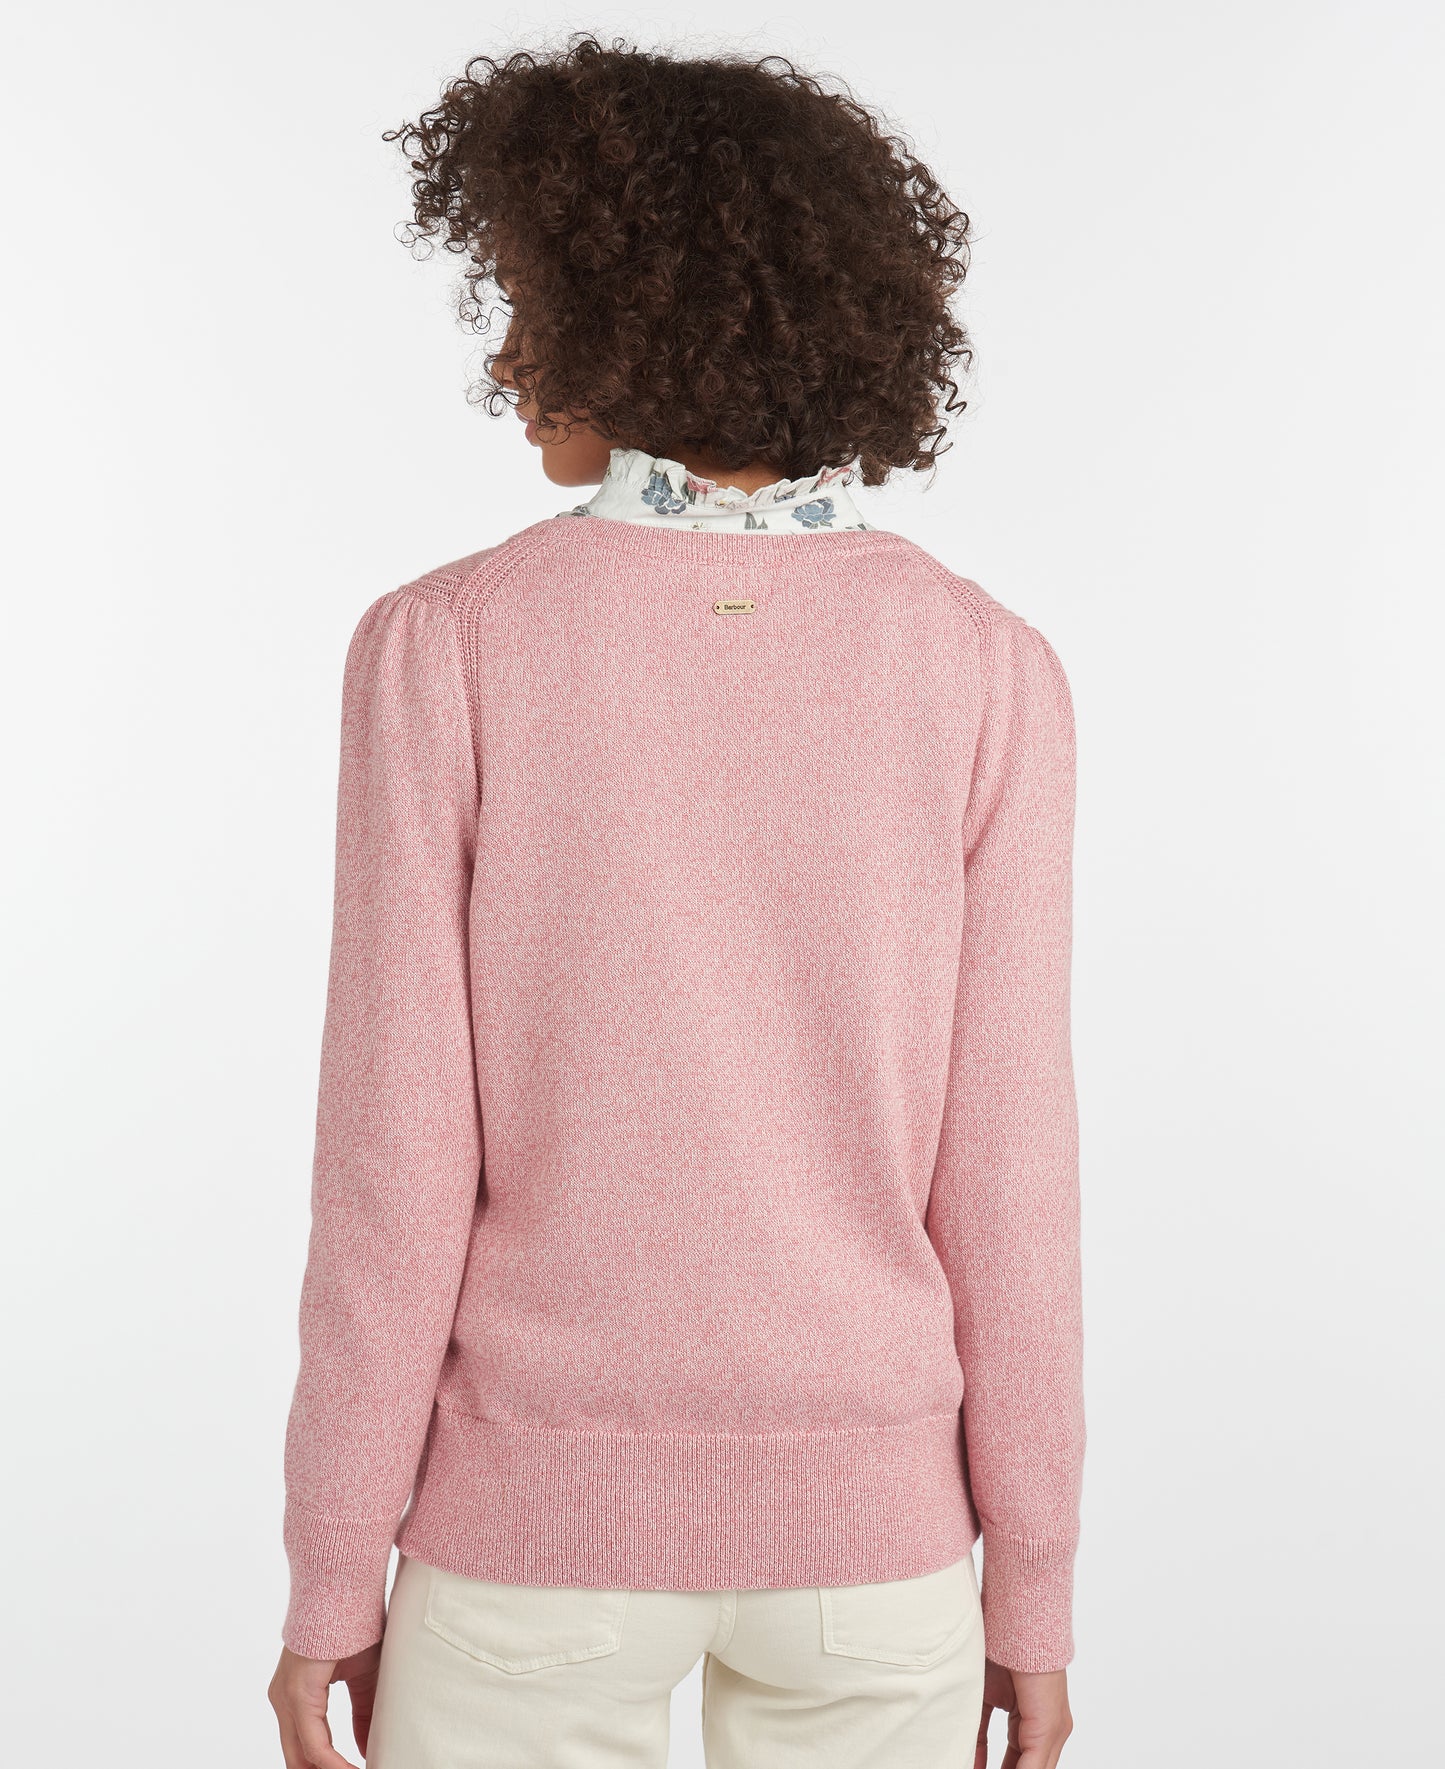 Barbour Bowland Knit Sweater